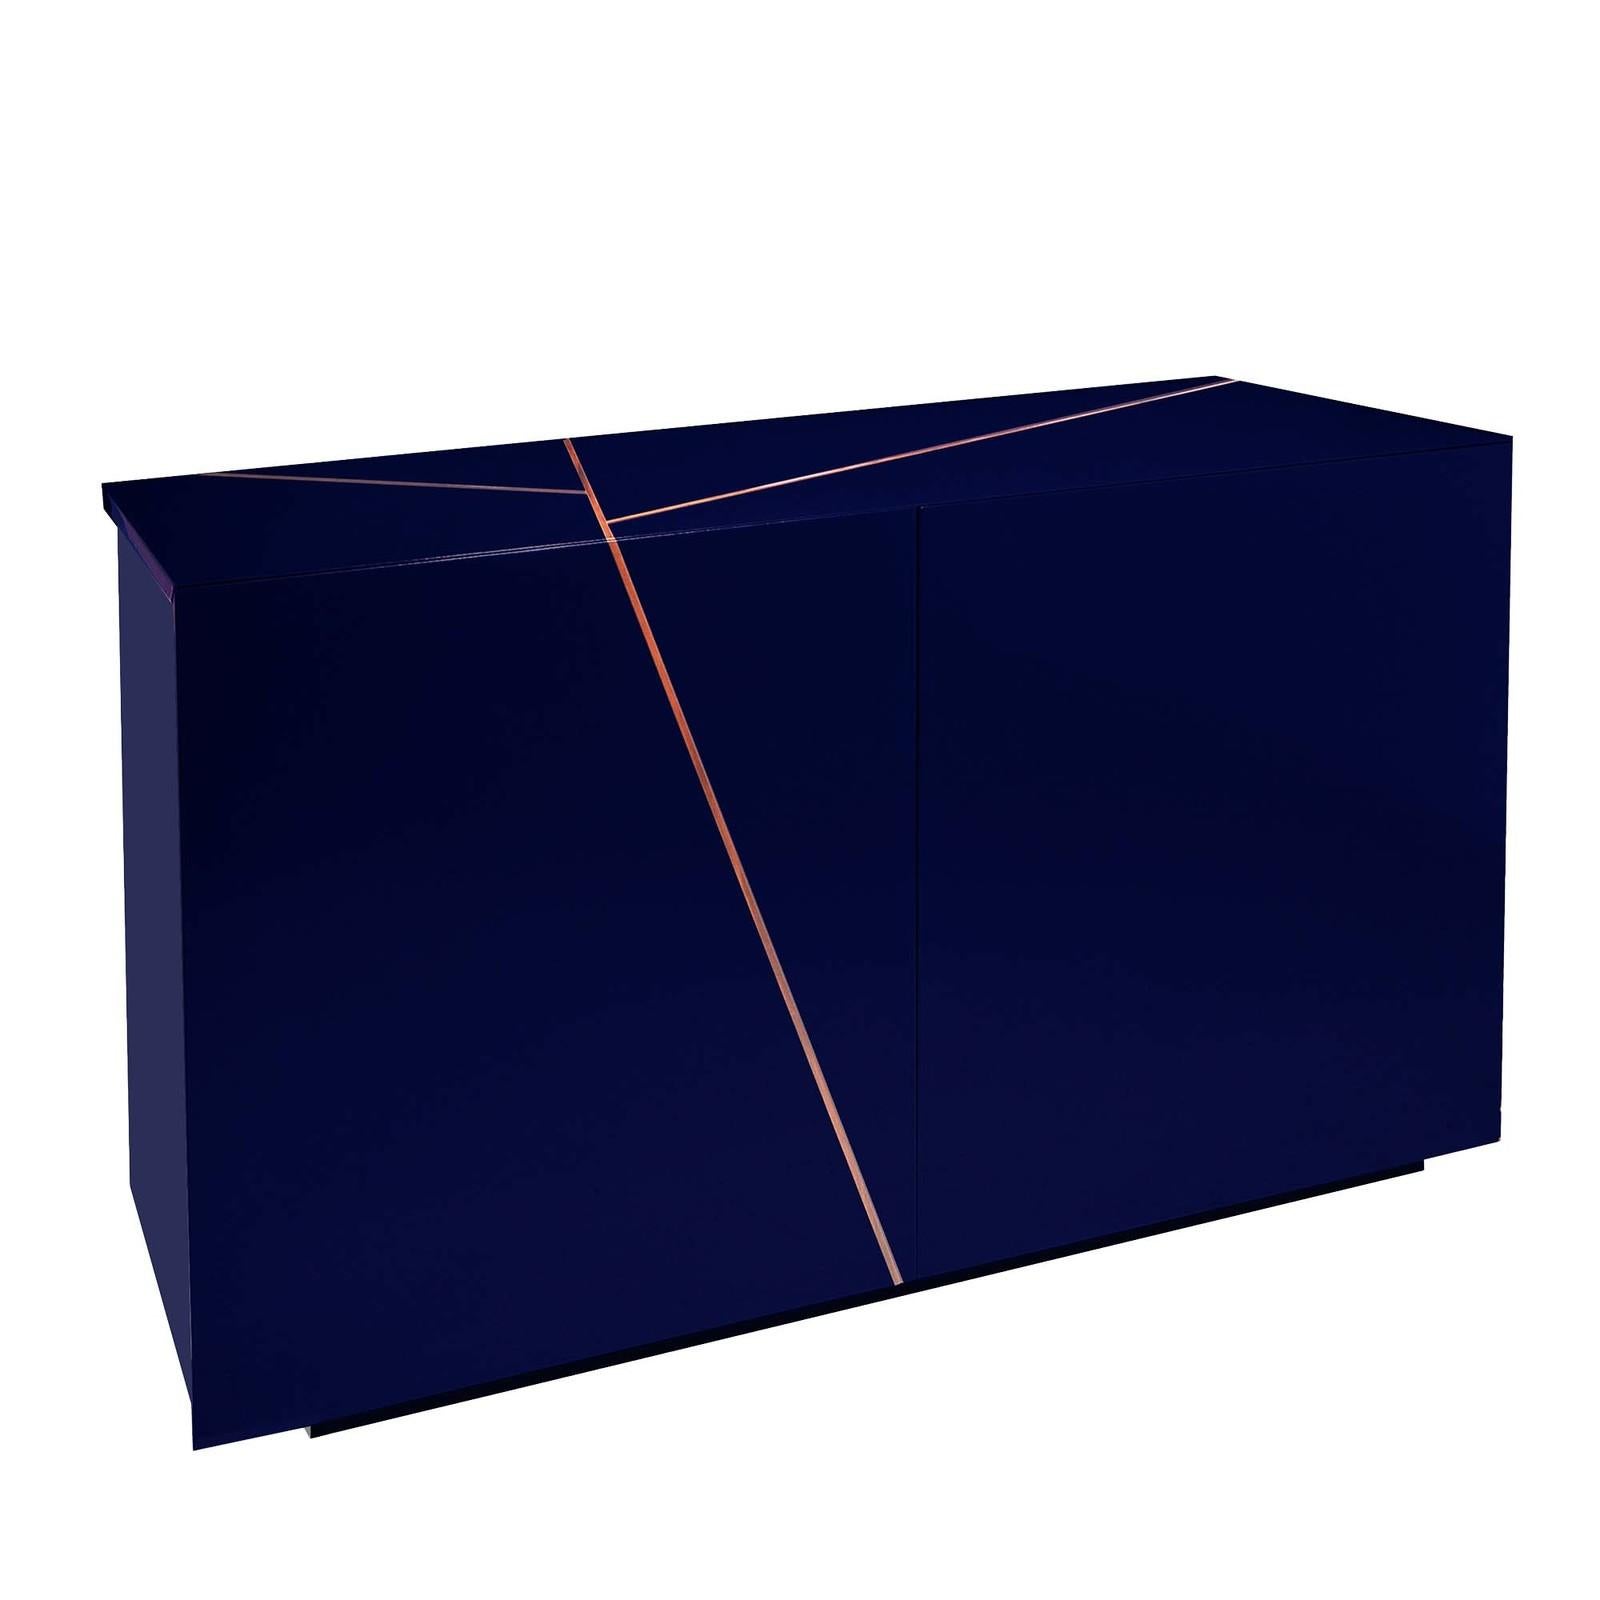 An elegant and impressive storage unit with a great style, this two-door cabinet's simple structure is finished in glossy blue polyurethane lacquer, marked by irregular inlays of Macassar ebony across front and top. The interior is equipped with